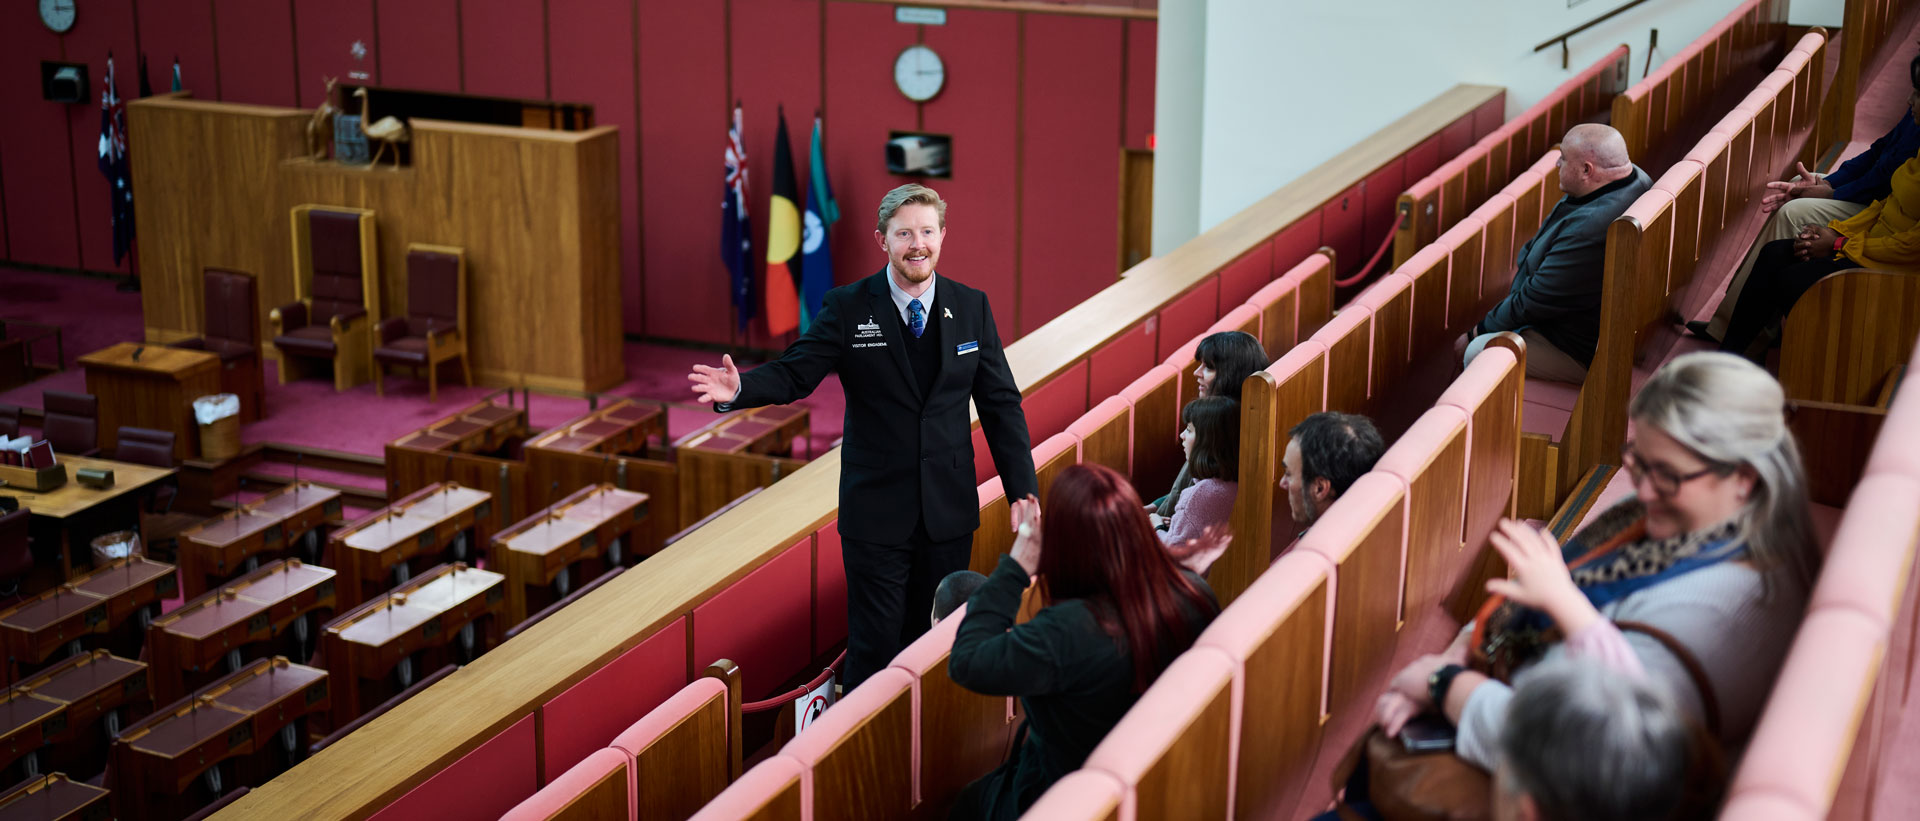 A guide shows visitors features of Members Hall at Parliament House